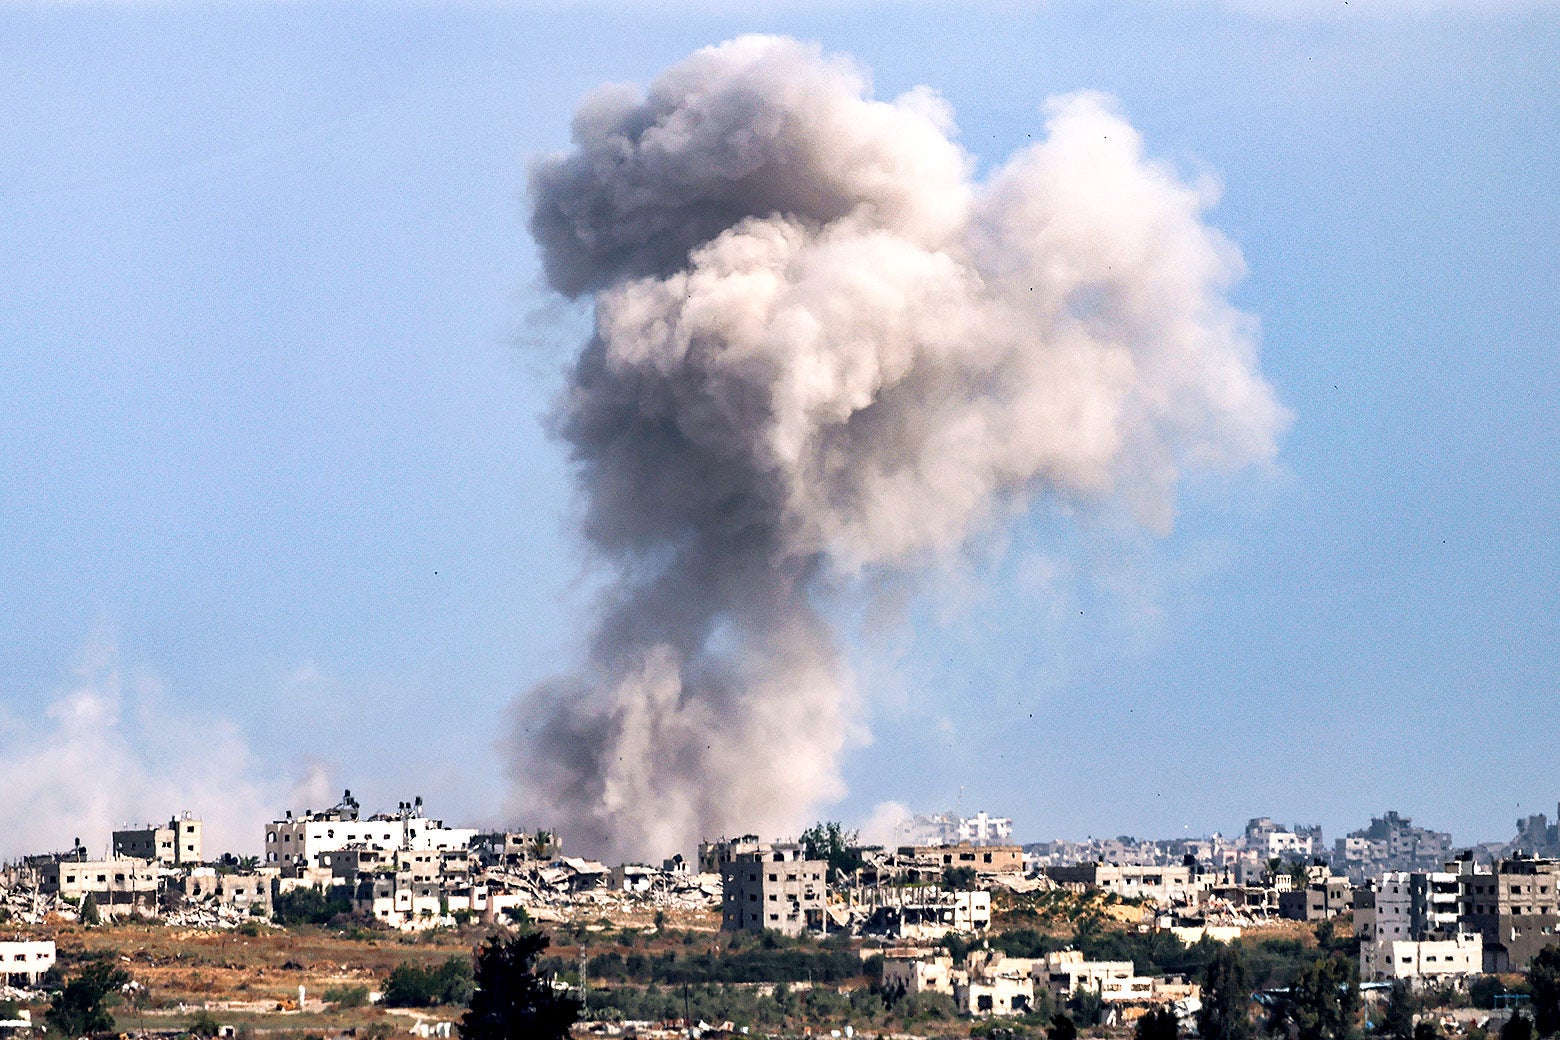 A smoke plume from an explosion billows in the Gaza Strip as seen from a position along Israel's southern border.